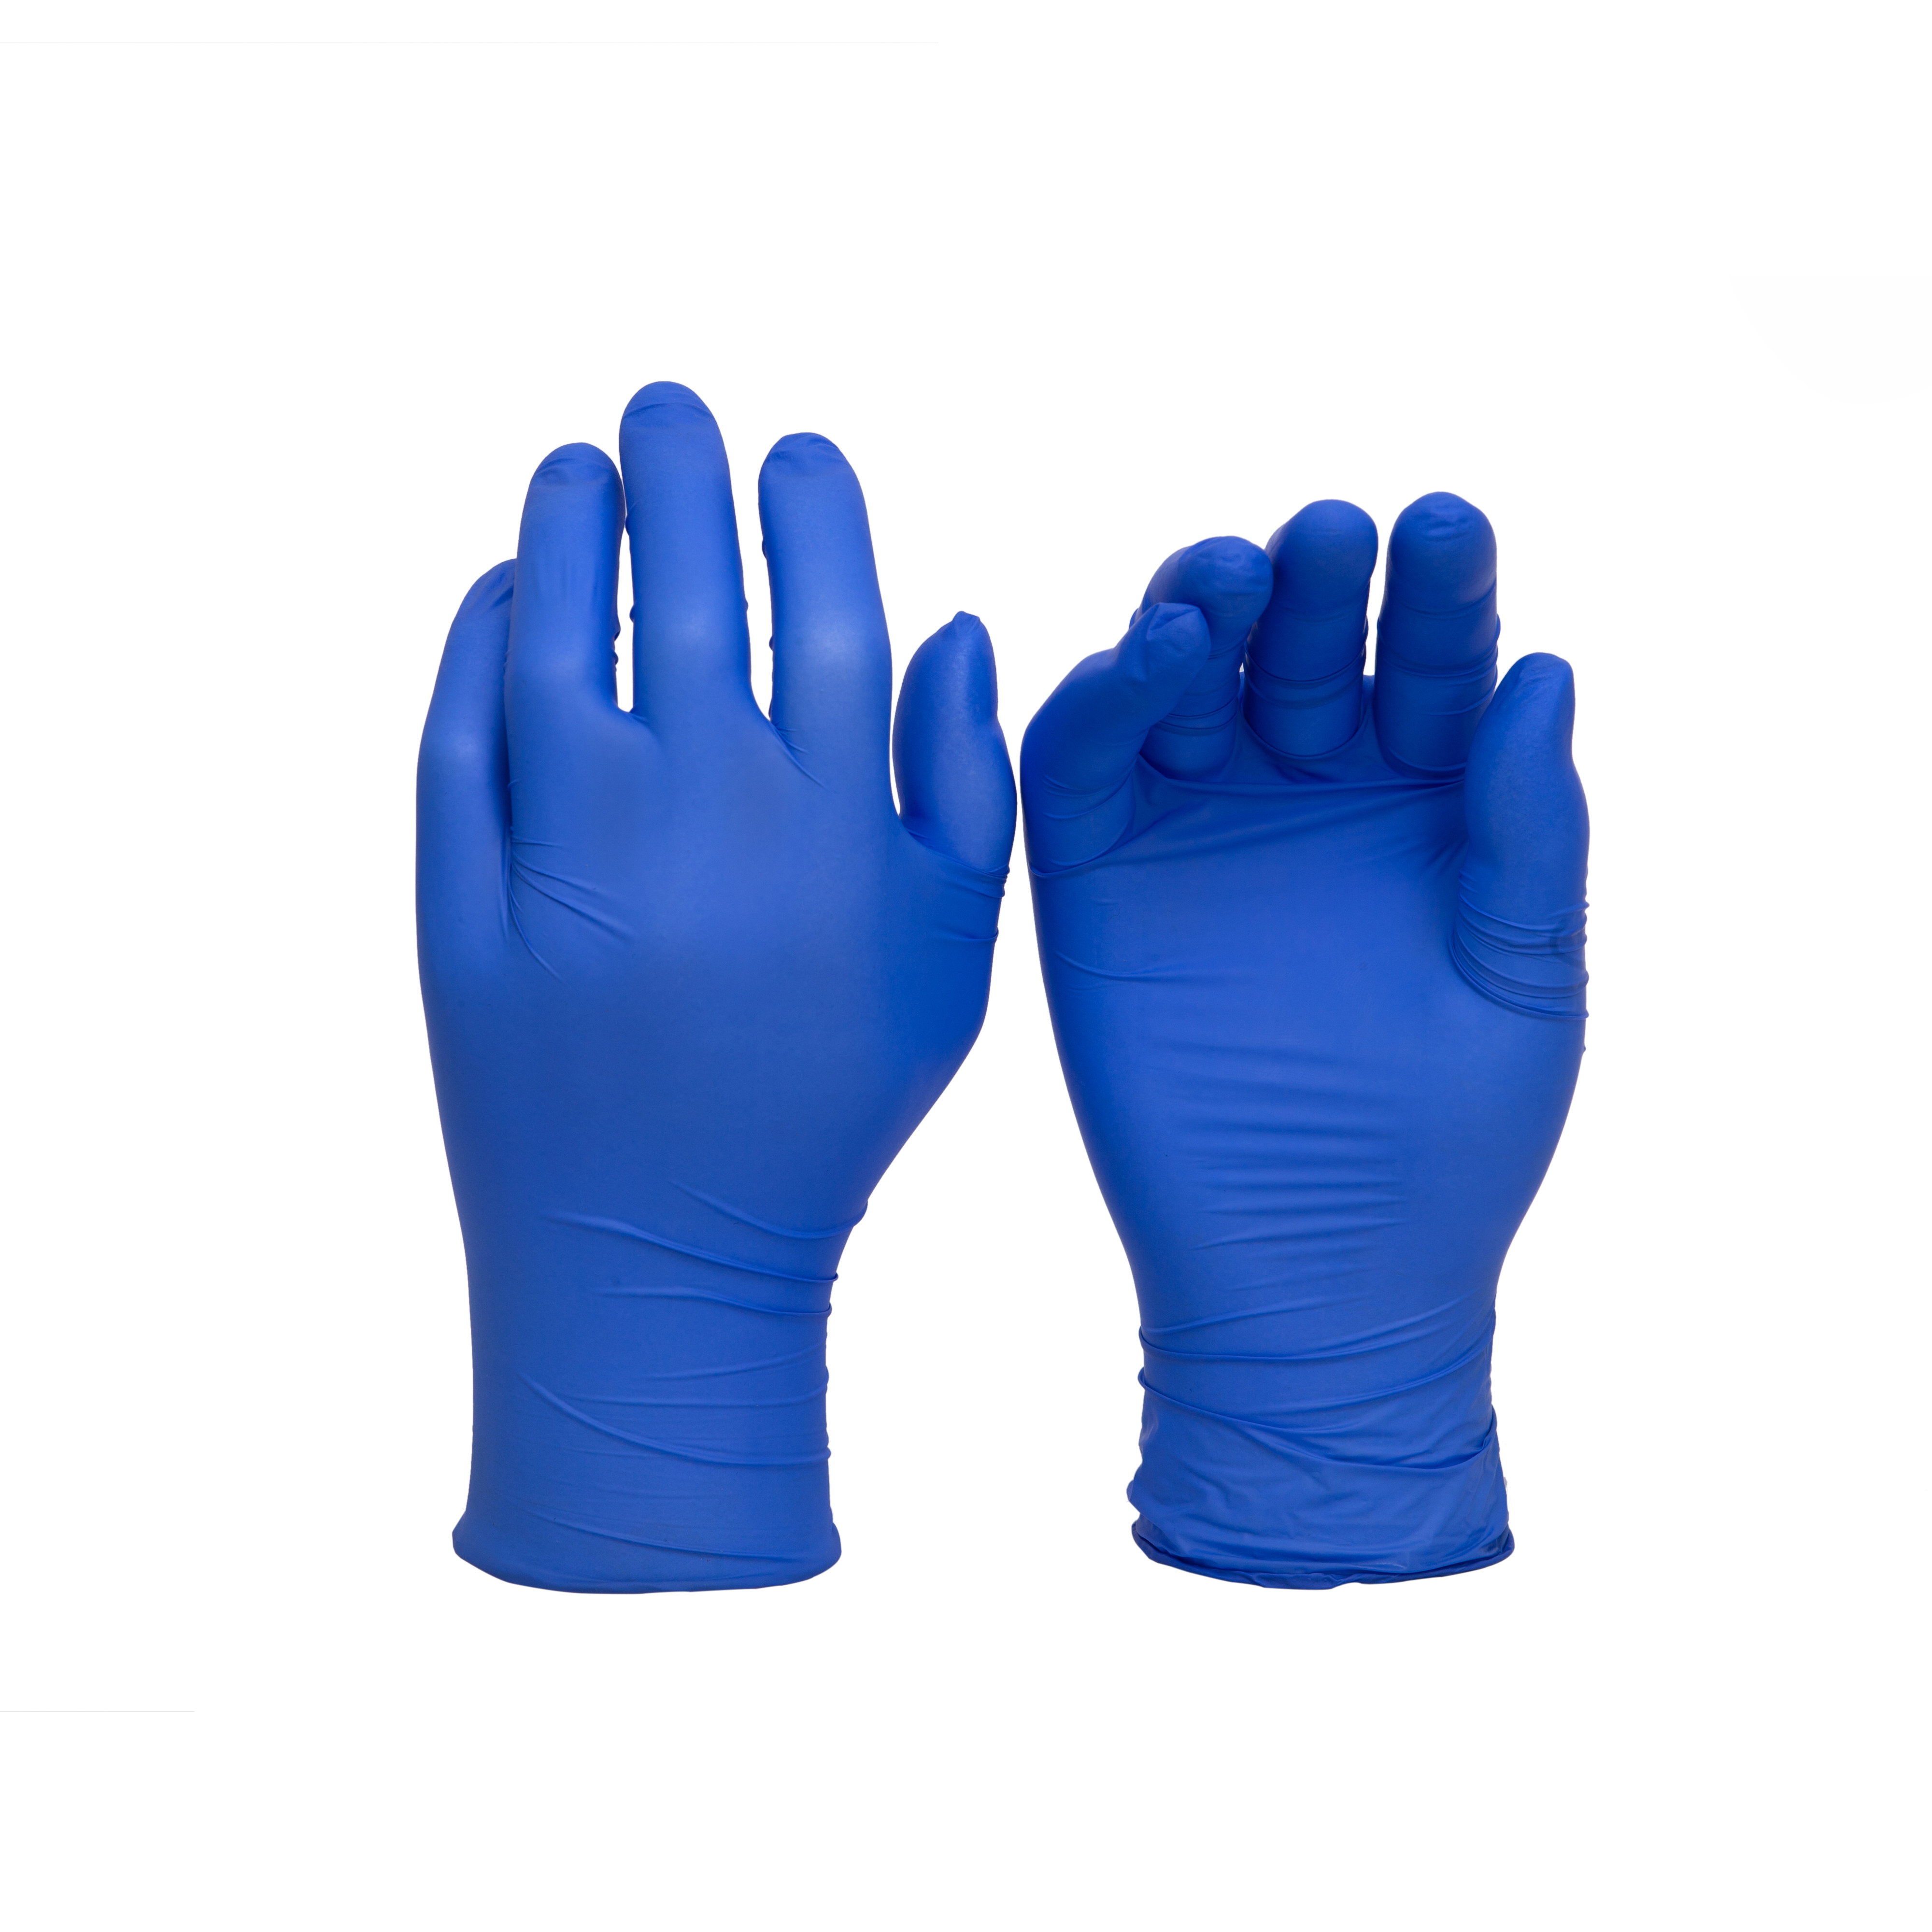 Medical Protective Latex gloves